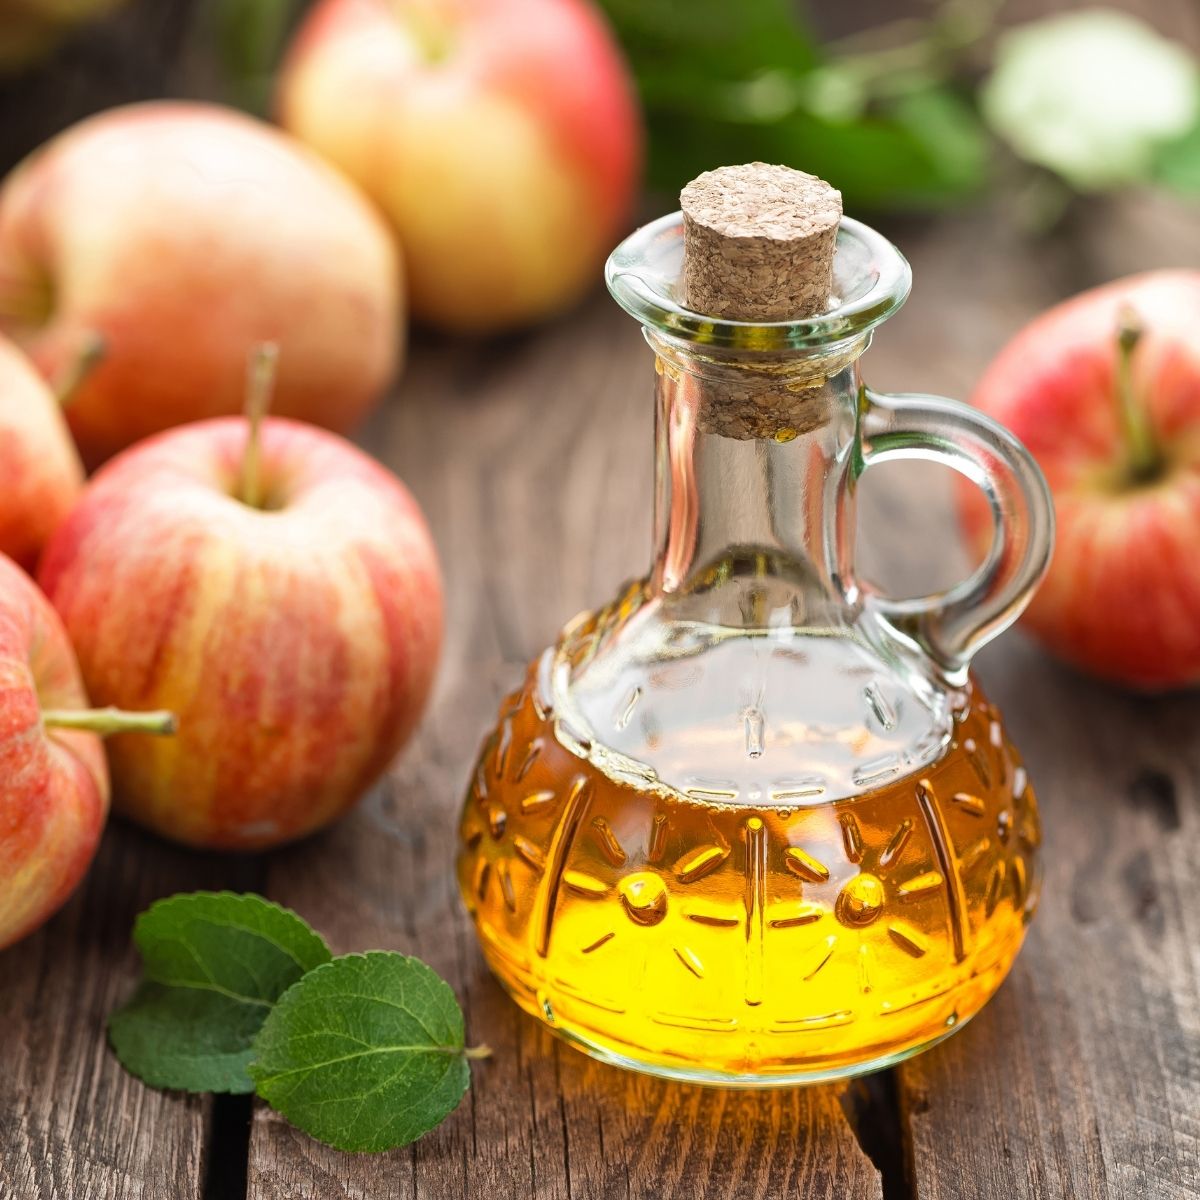 How to lose belly fat with apple cider vinegar successfully.